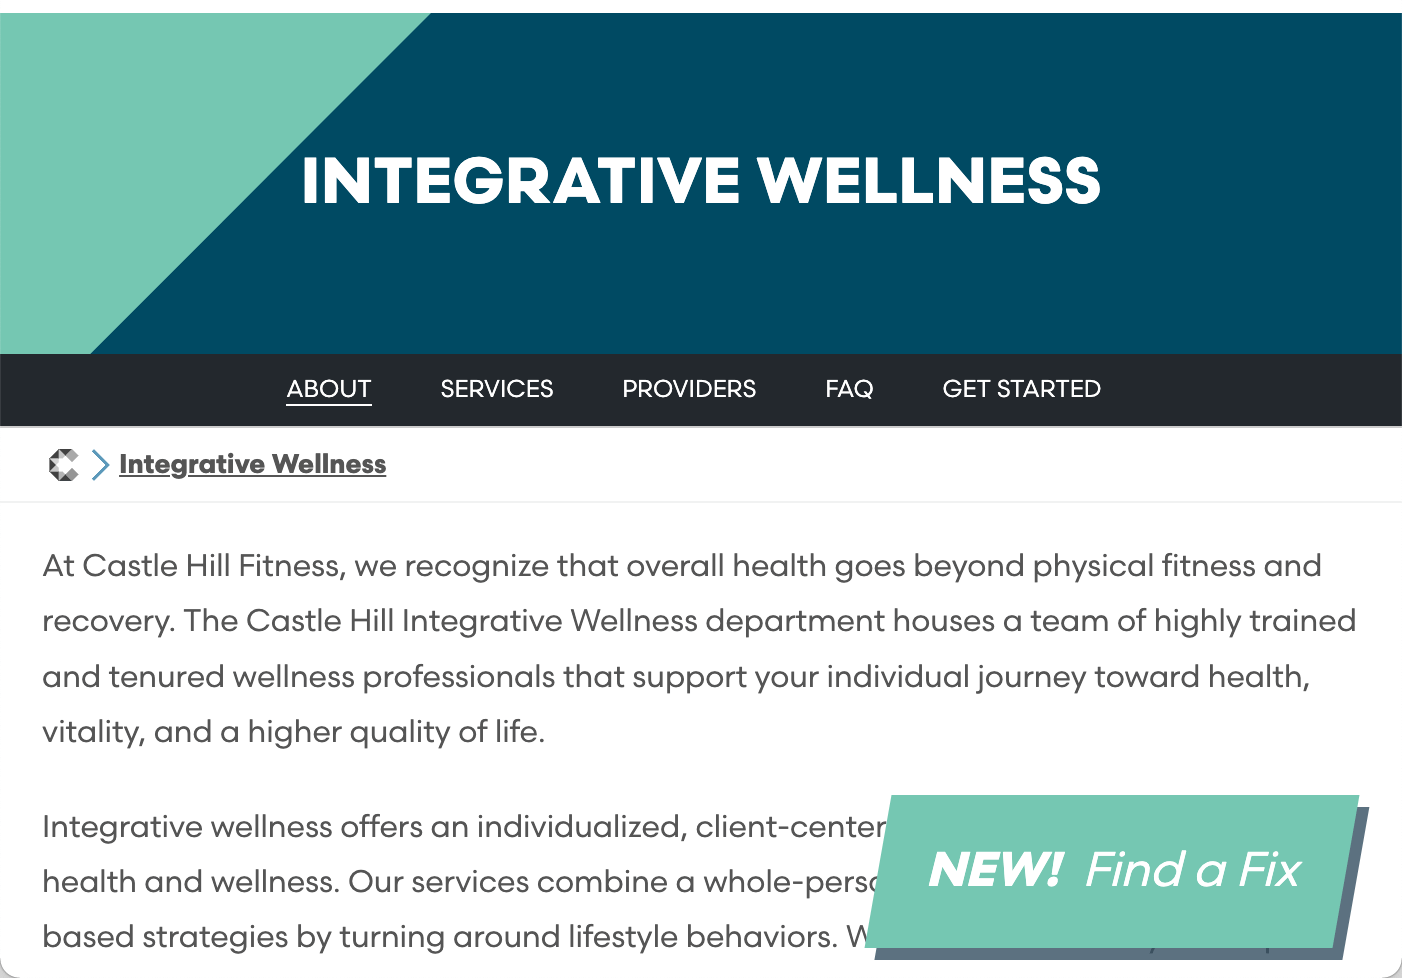 Image of Find-a-Fix tool icon on bottom right of Integrative Wellness page